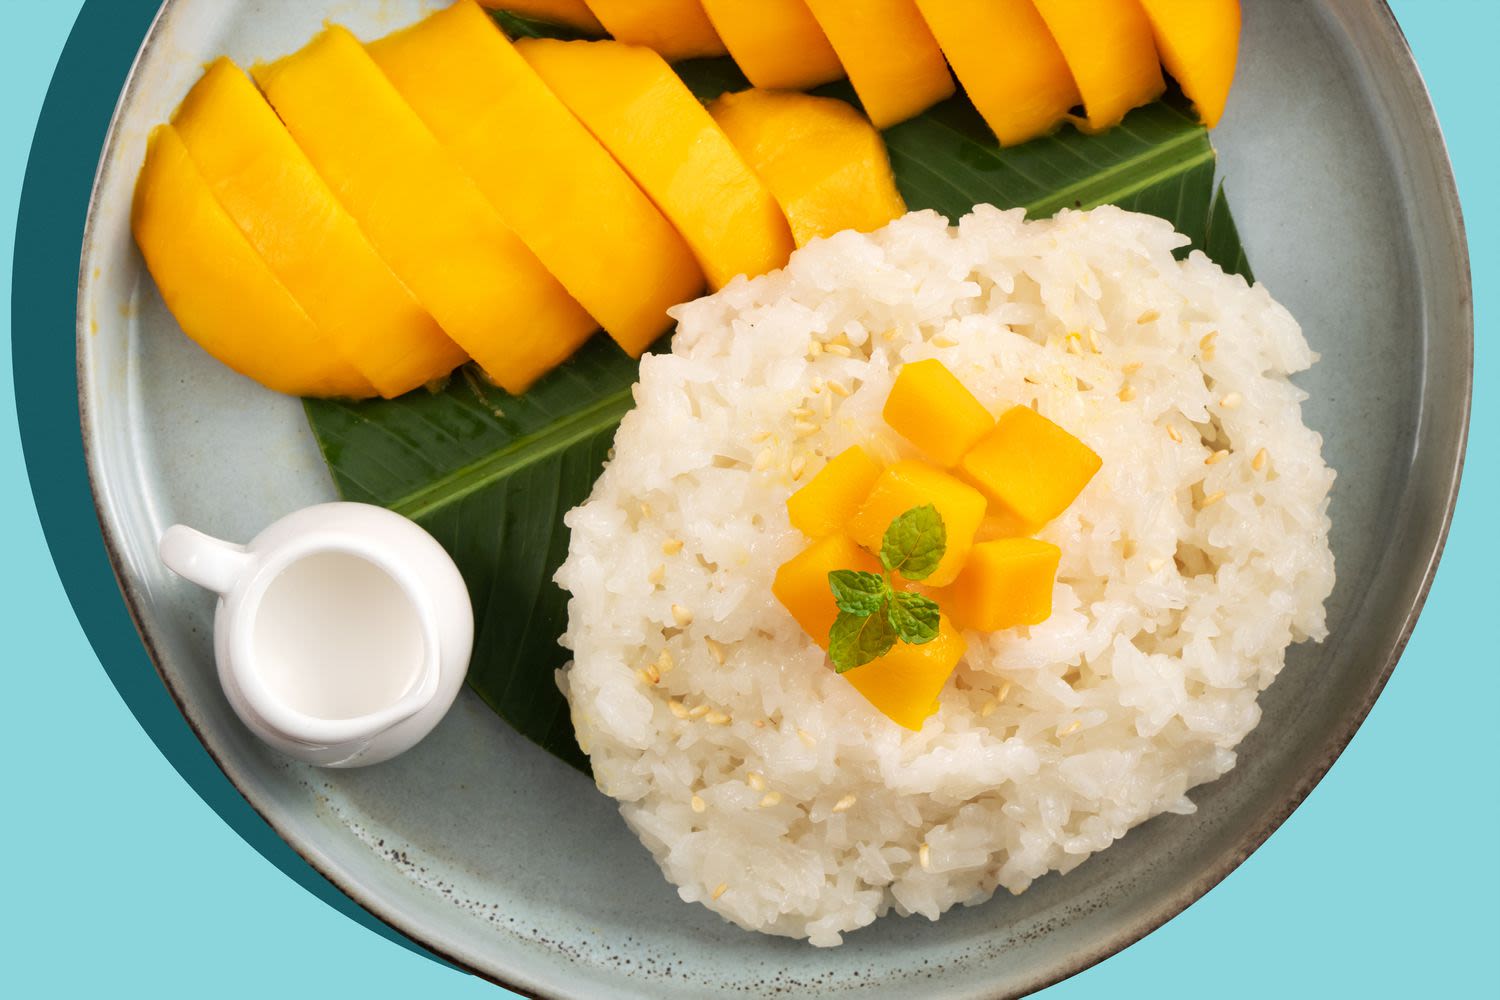 How to Make Restaurant-Quality Sticky Rice in 4 Easy Steps